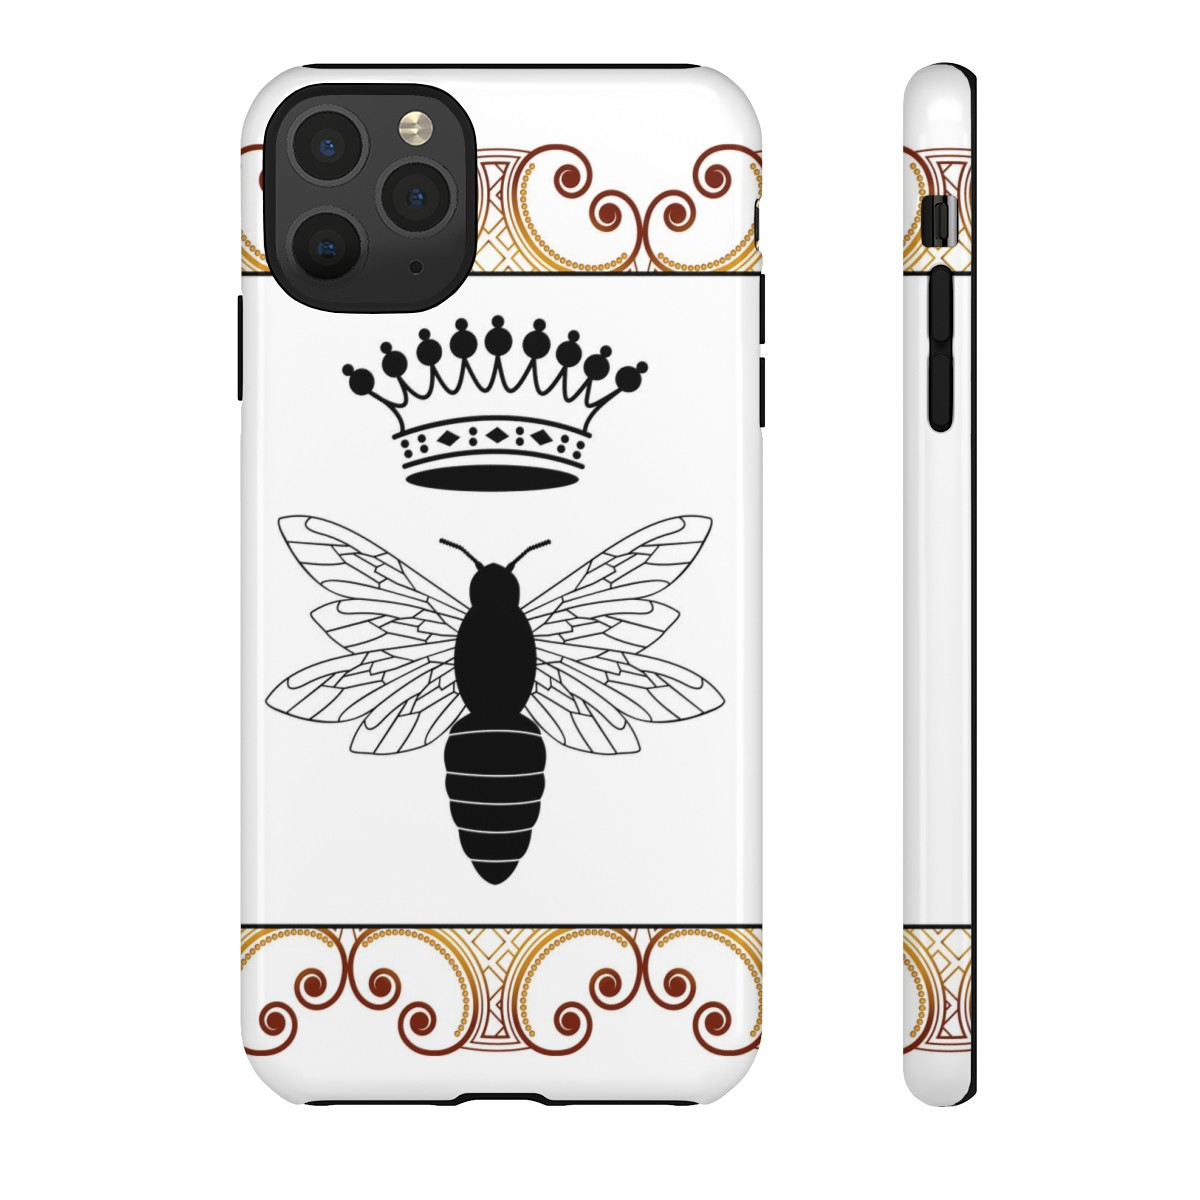 Phone Cases Queen Bee product thumbnail image